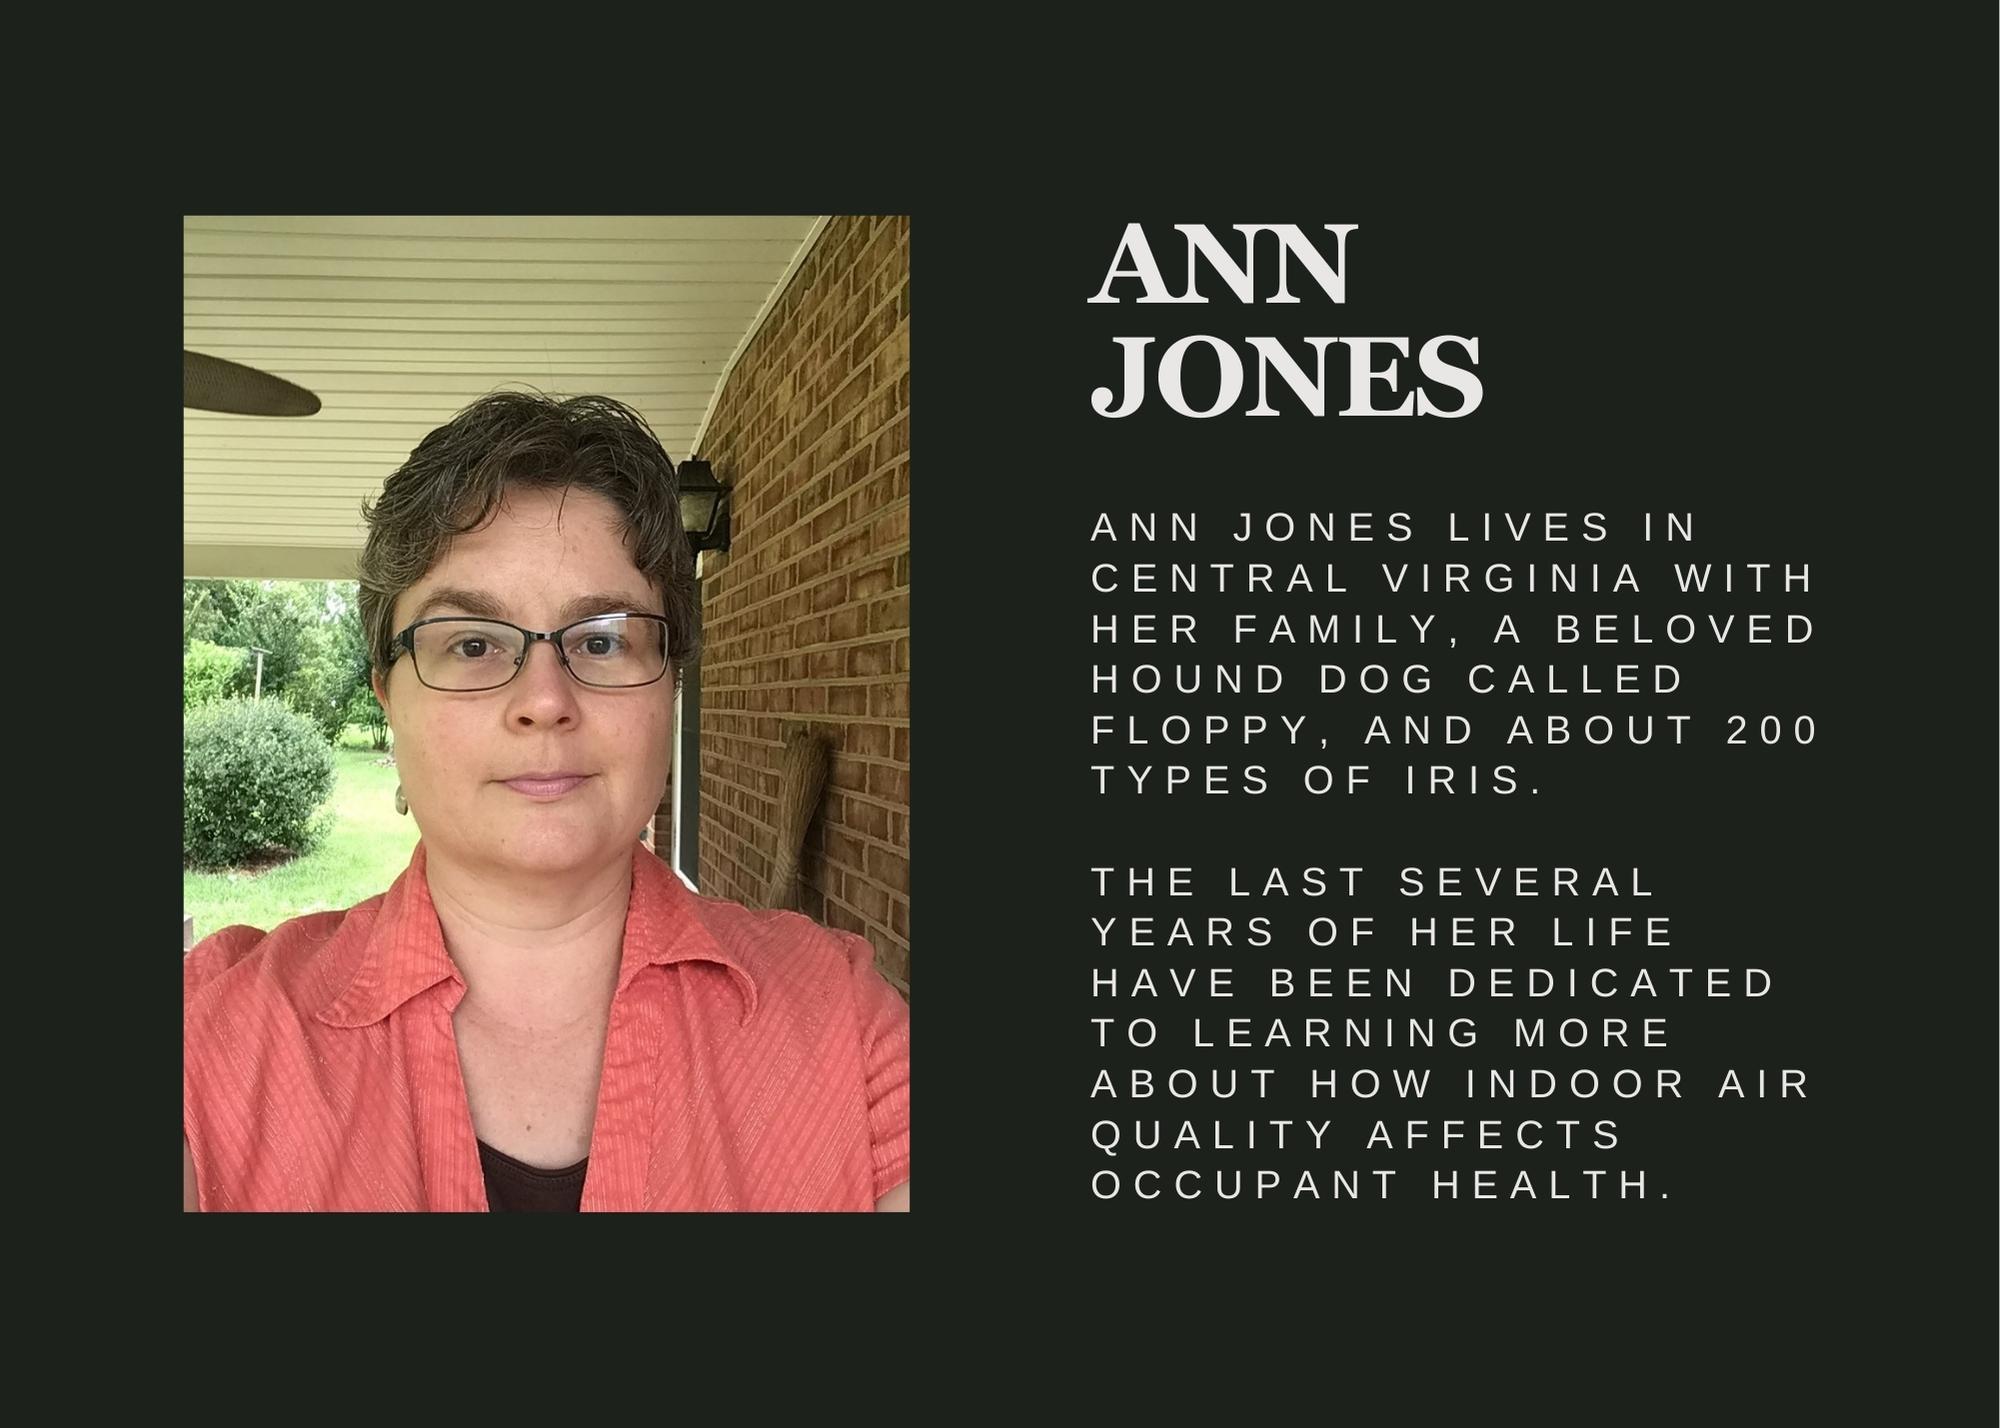 Author Ann Jones, a white woman in a red shirt with short hair and glasses